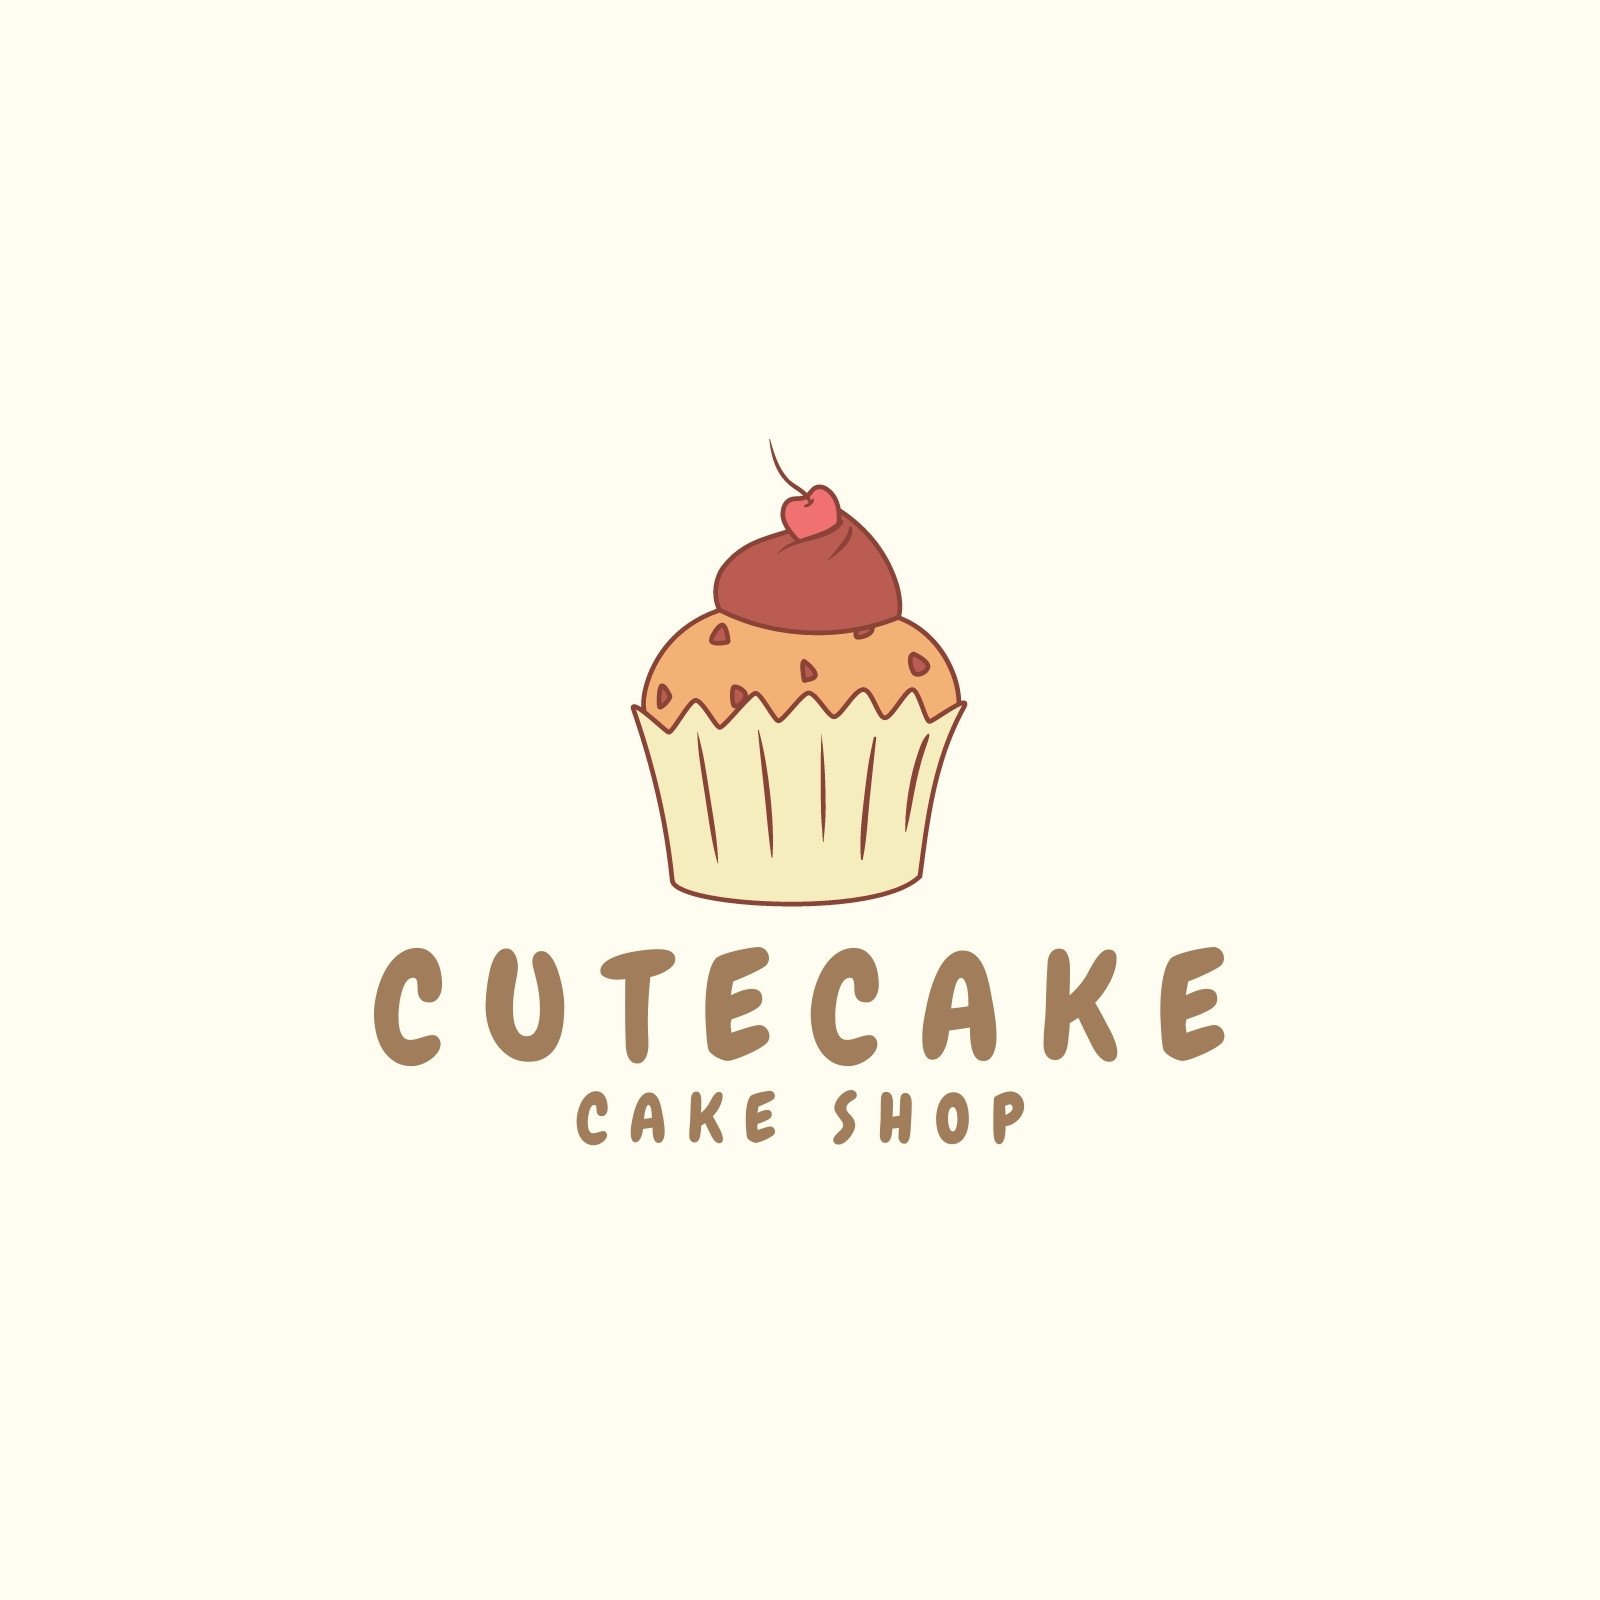 New Cake Palace in Peer Muchalla,Chandigarh - Best Cake Shops in Chandigarh  - Justdial